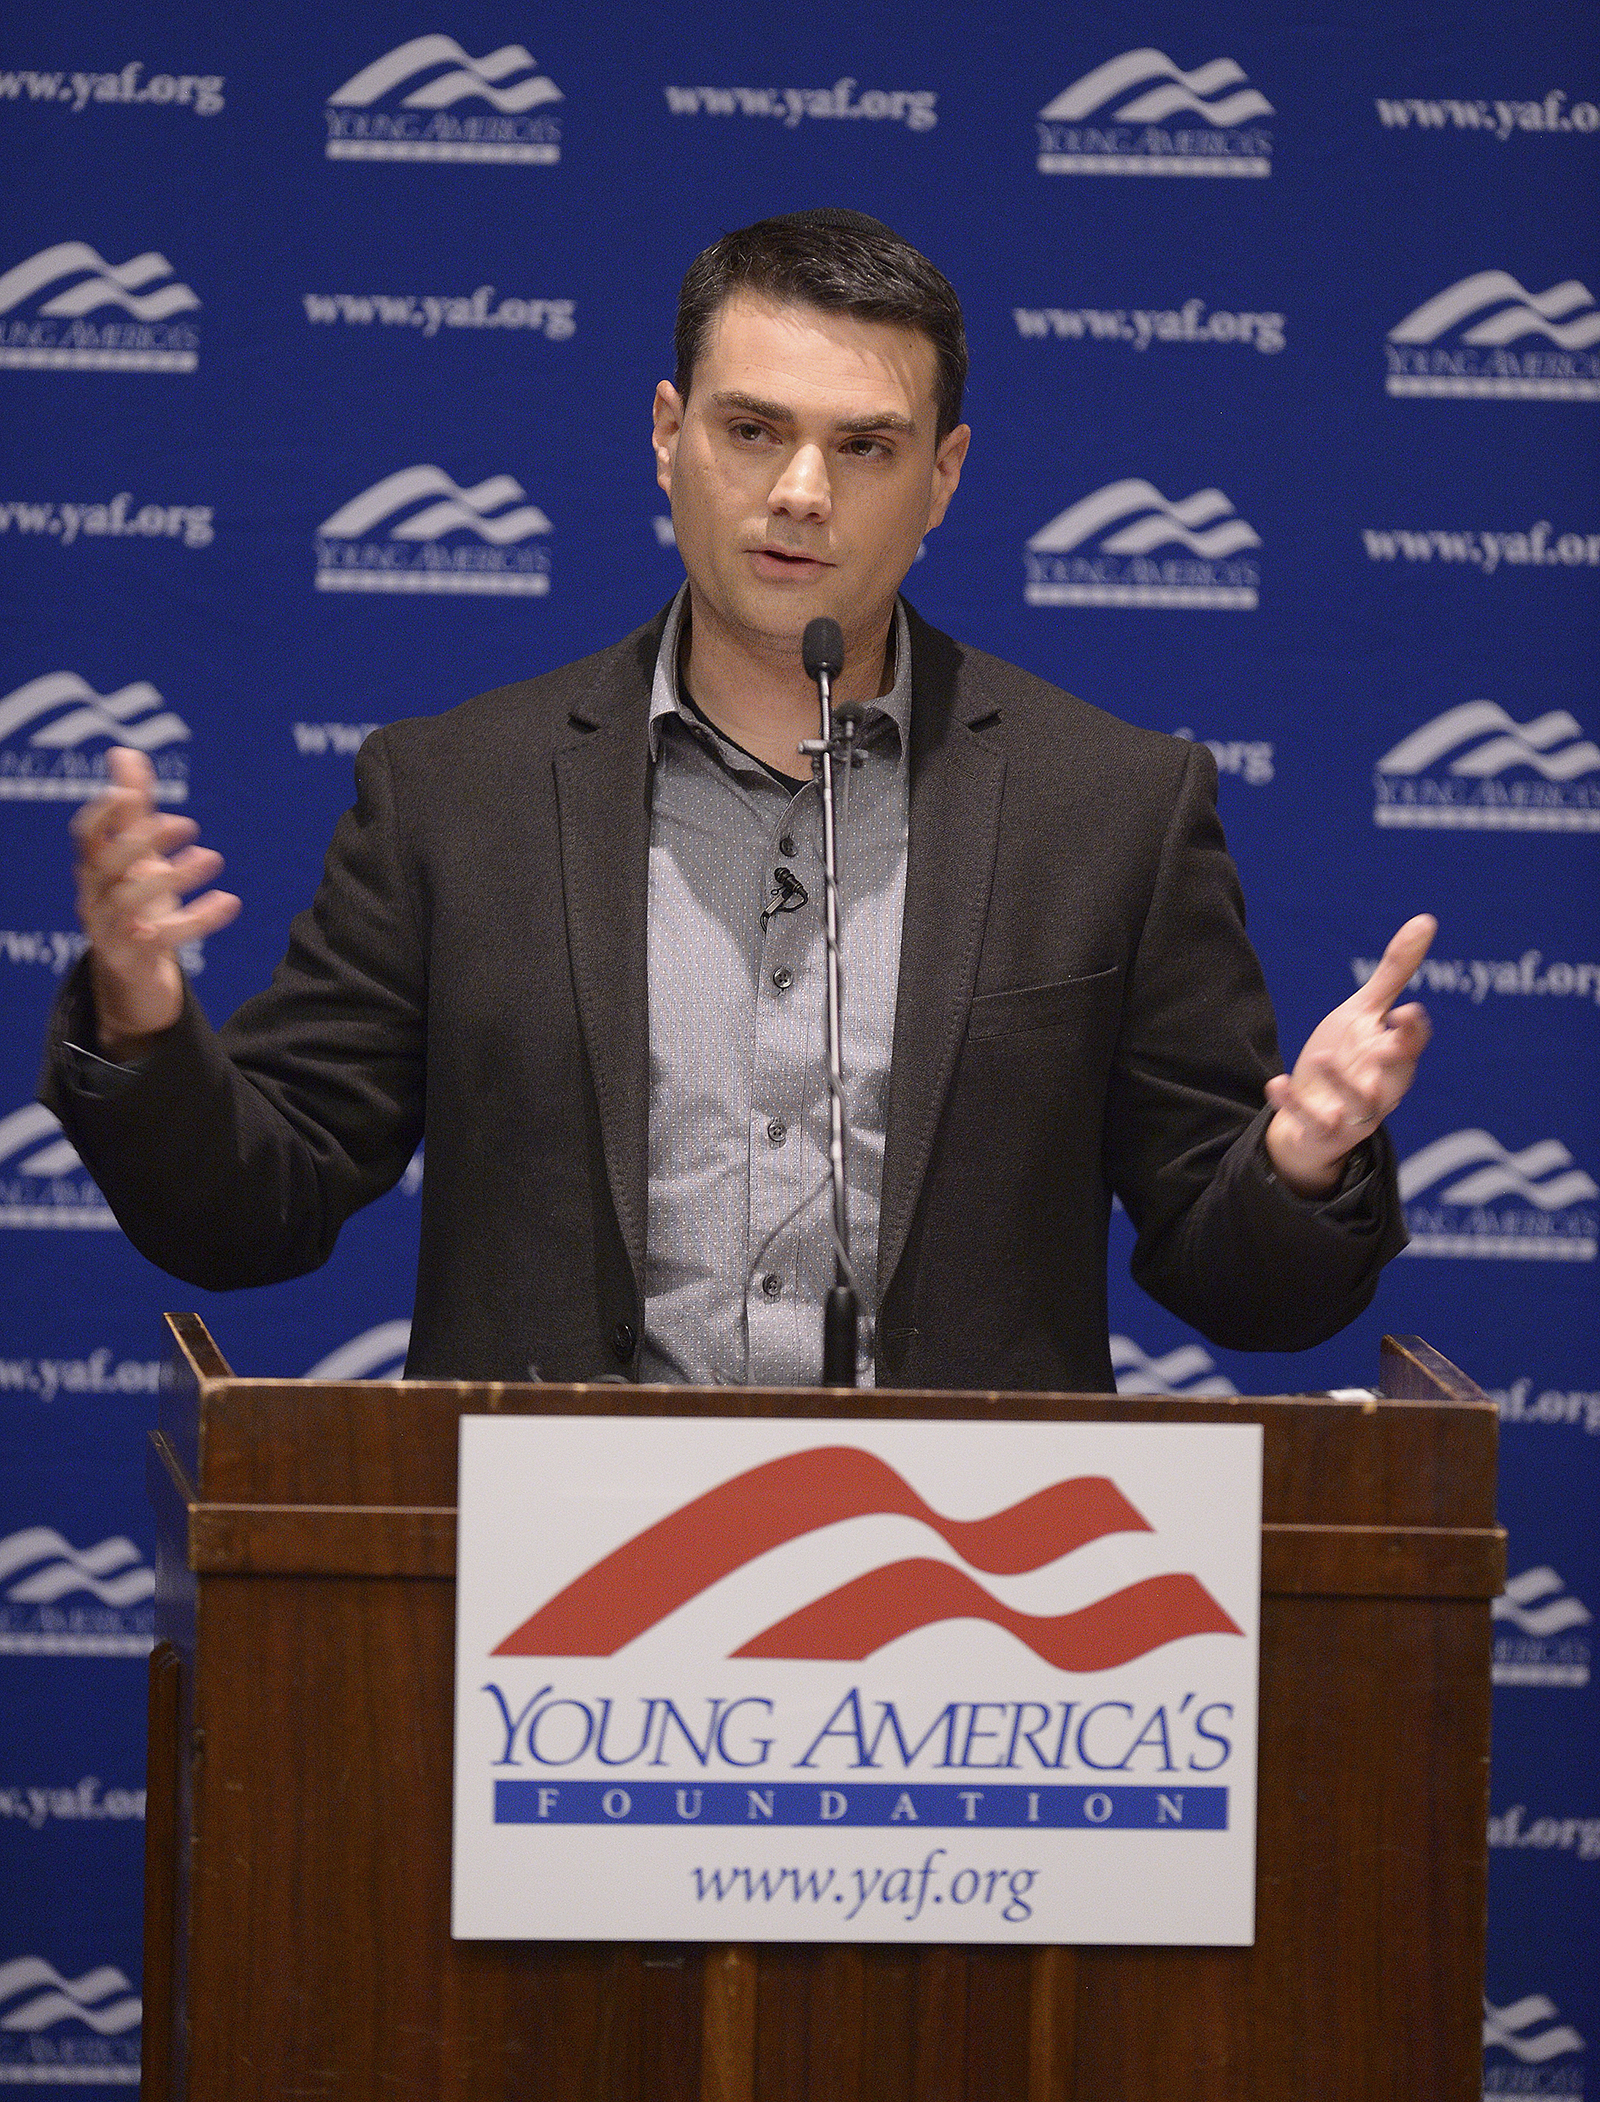 Ben Shapiro speaks at a podium with a sign for the Young Americans for Freedom